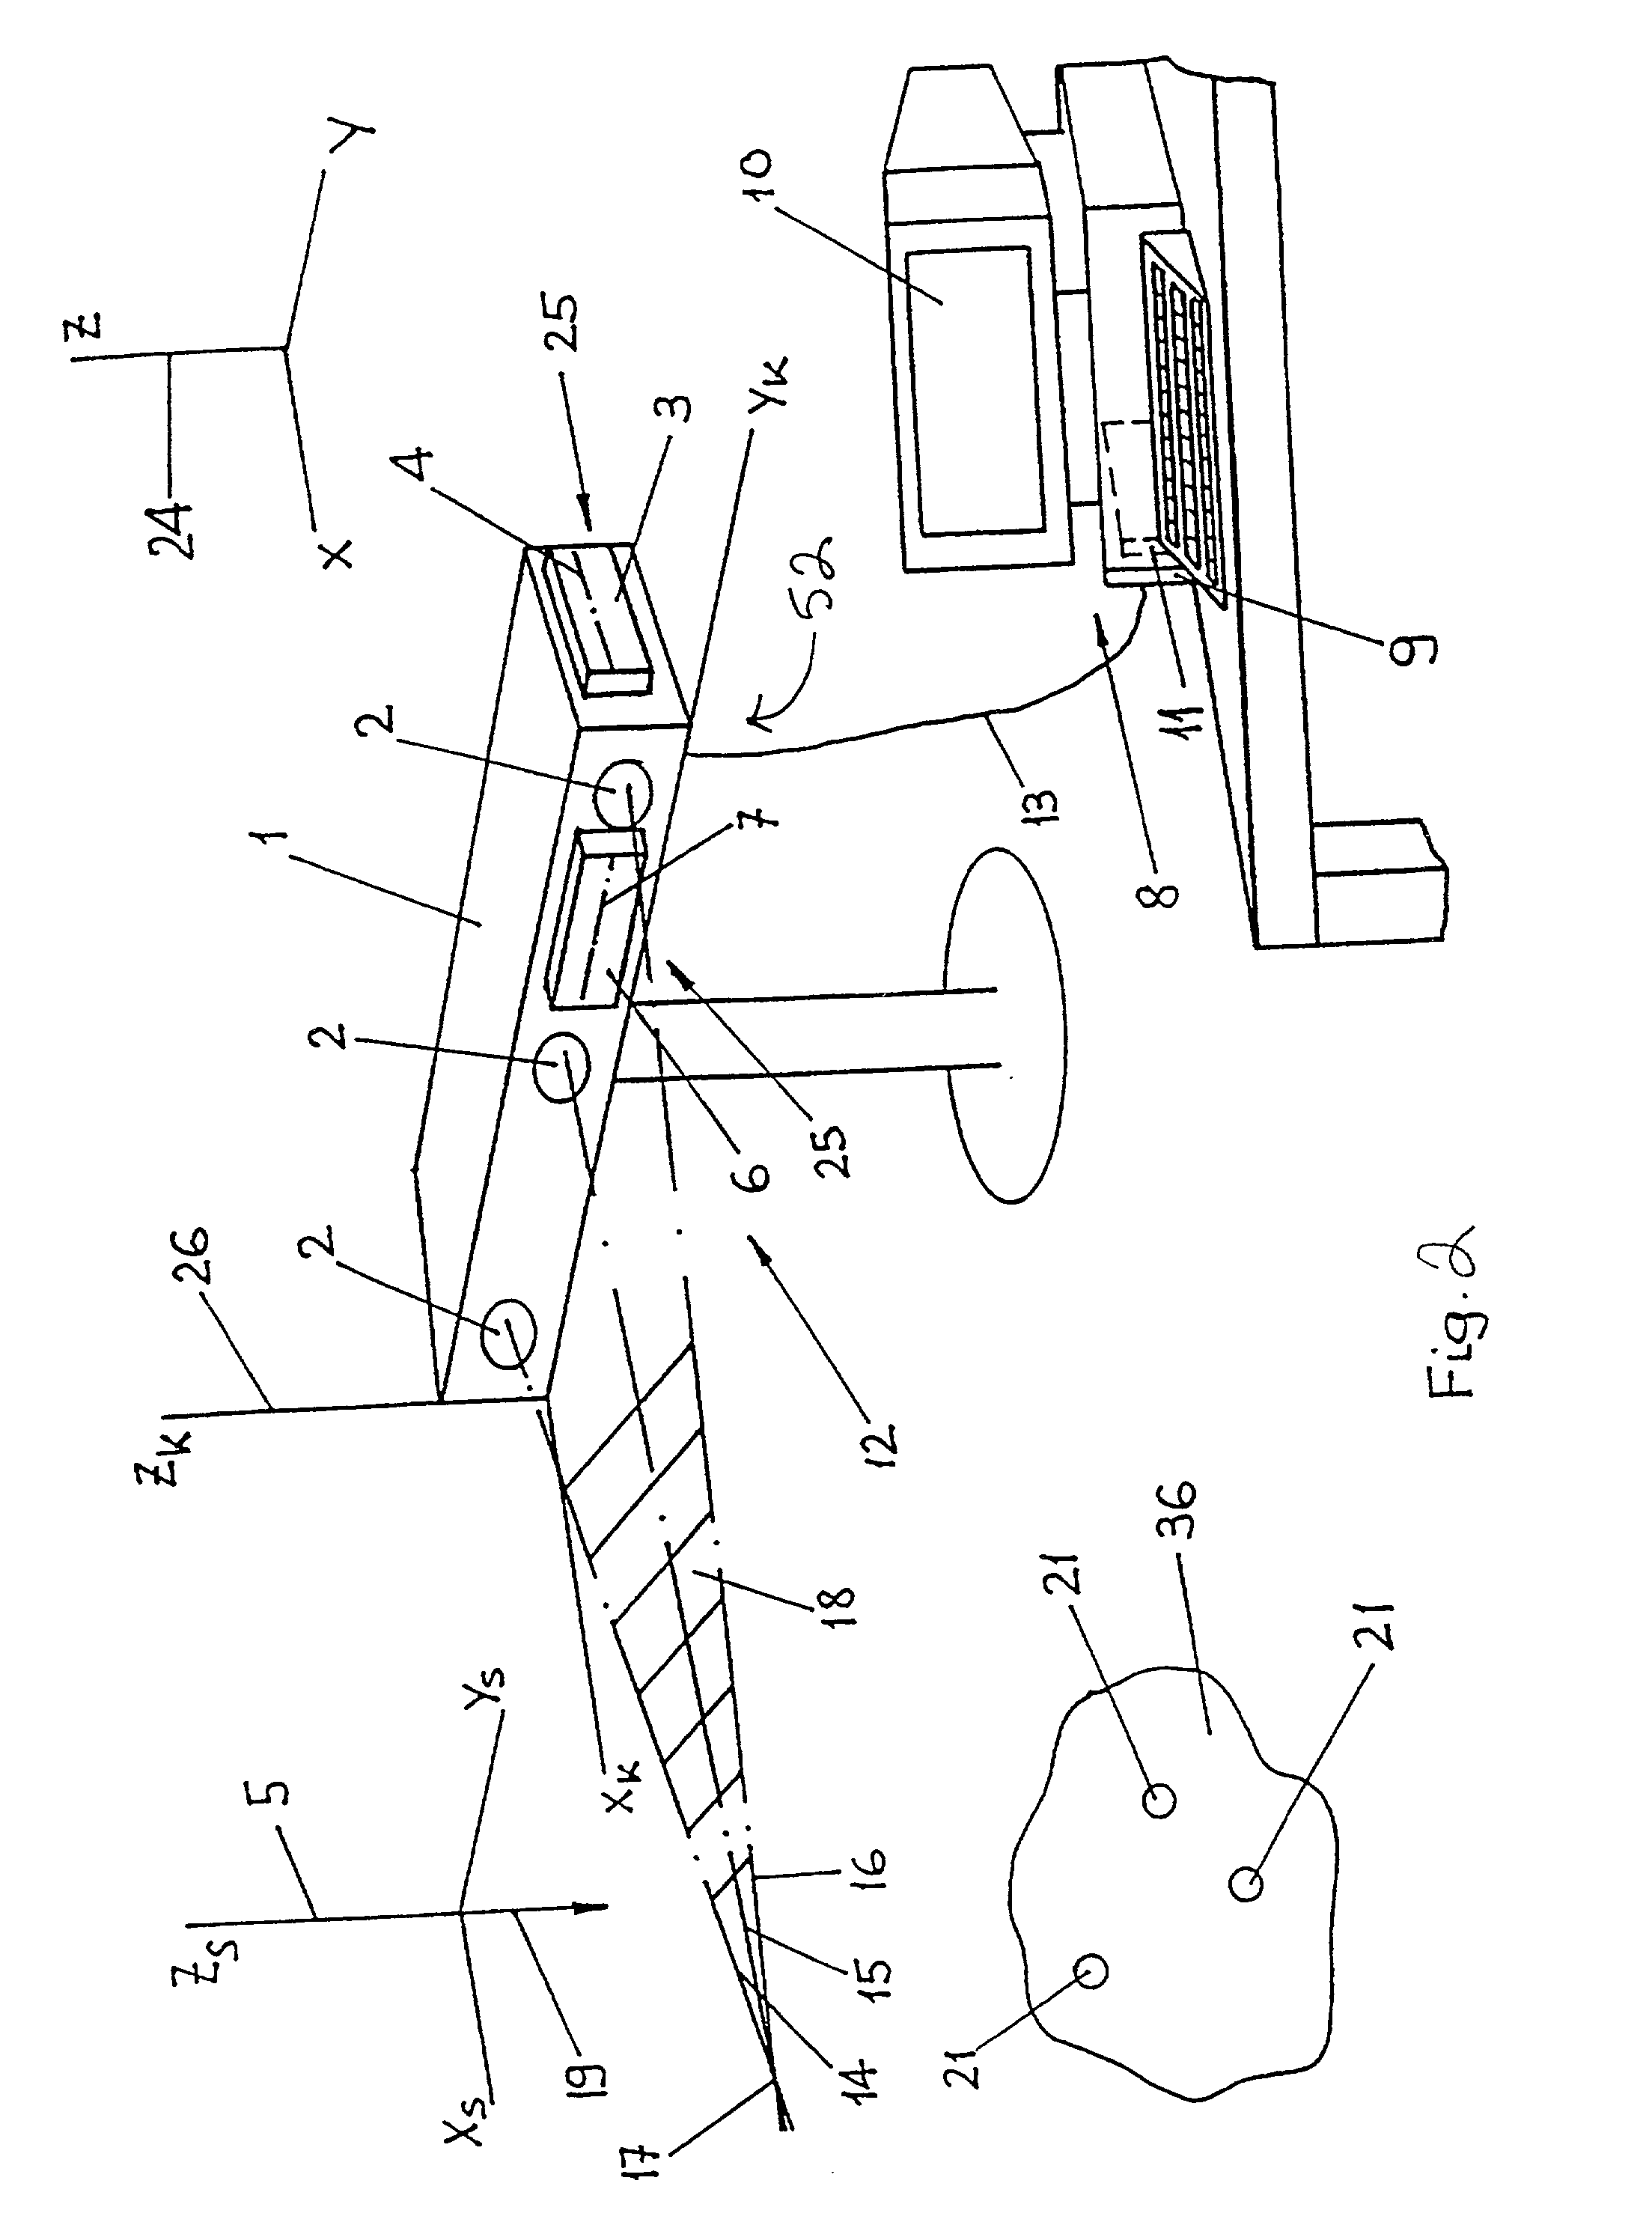 System and method for preparing an image corrected for the presence of a gravity induced distortion